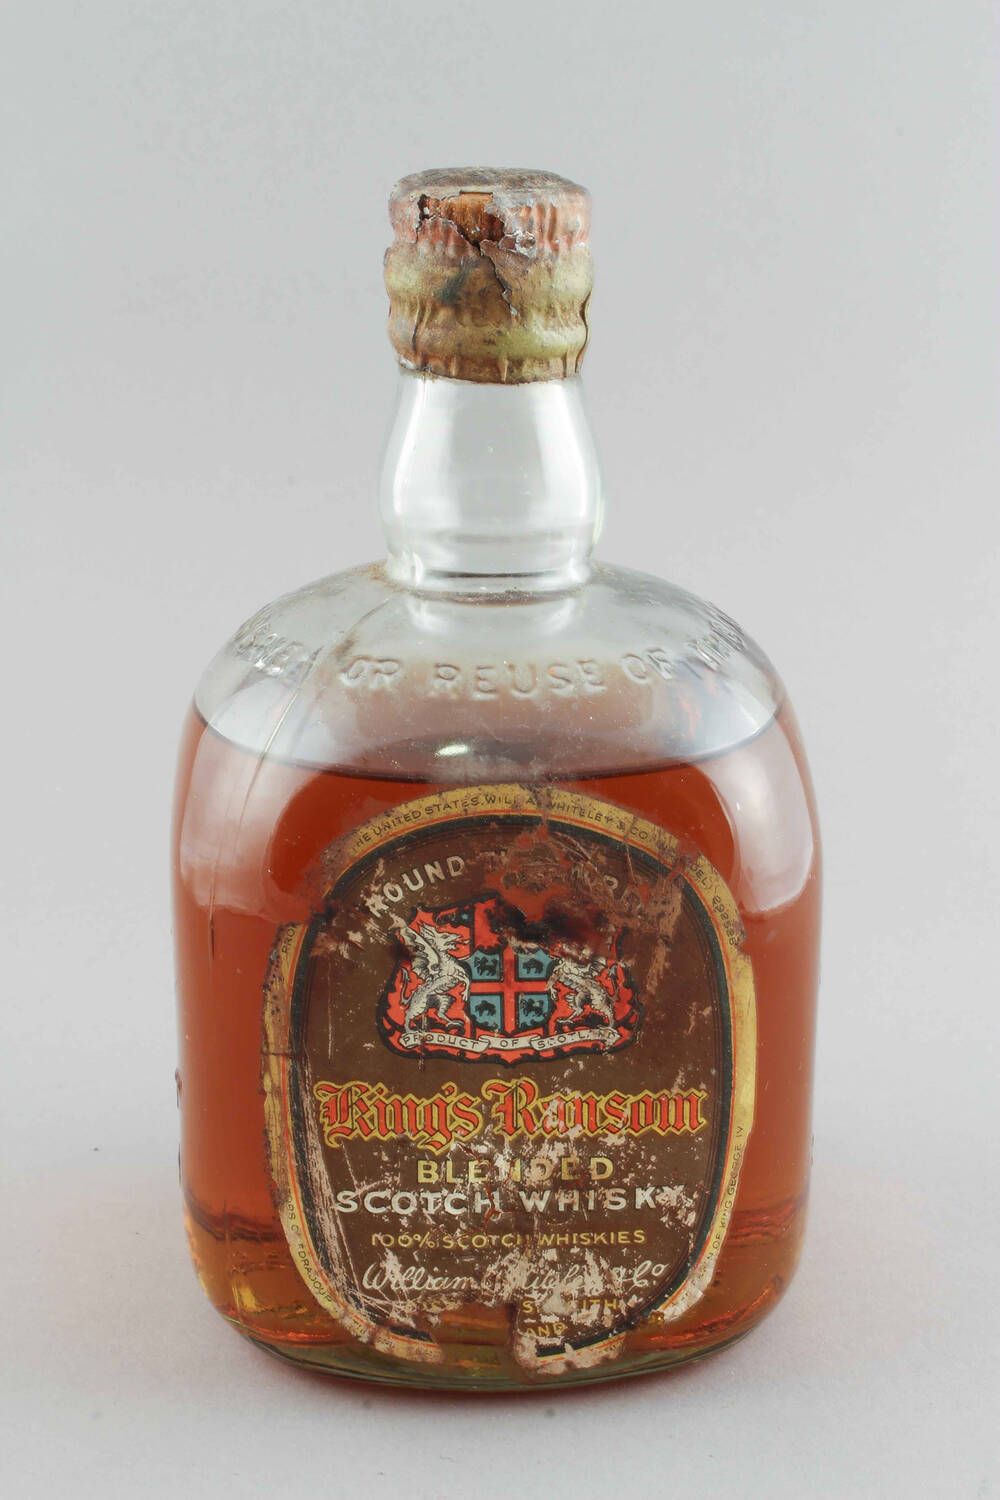 An old bottle of King’s Ransom whisky. The whisky is orange in colour and can be seen through the clear glass bottle. The label has worn away in places and the seal over the cork has split a little.